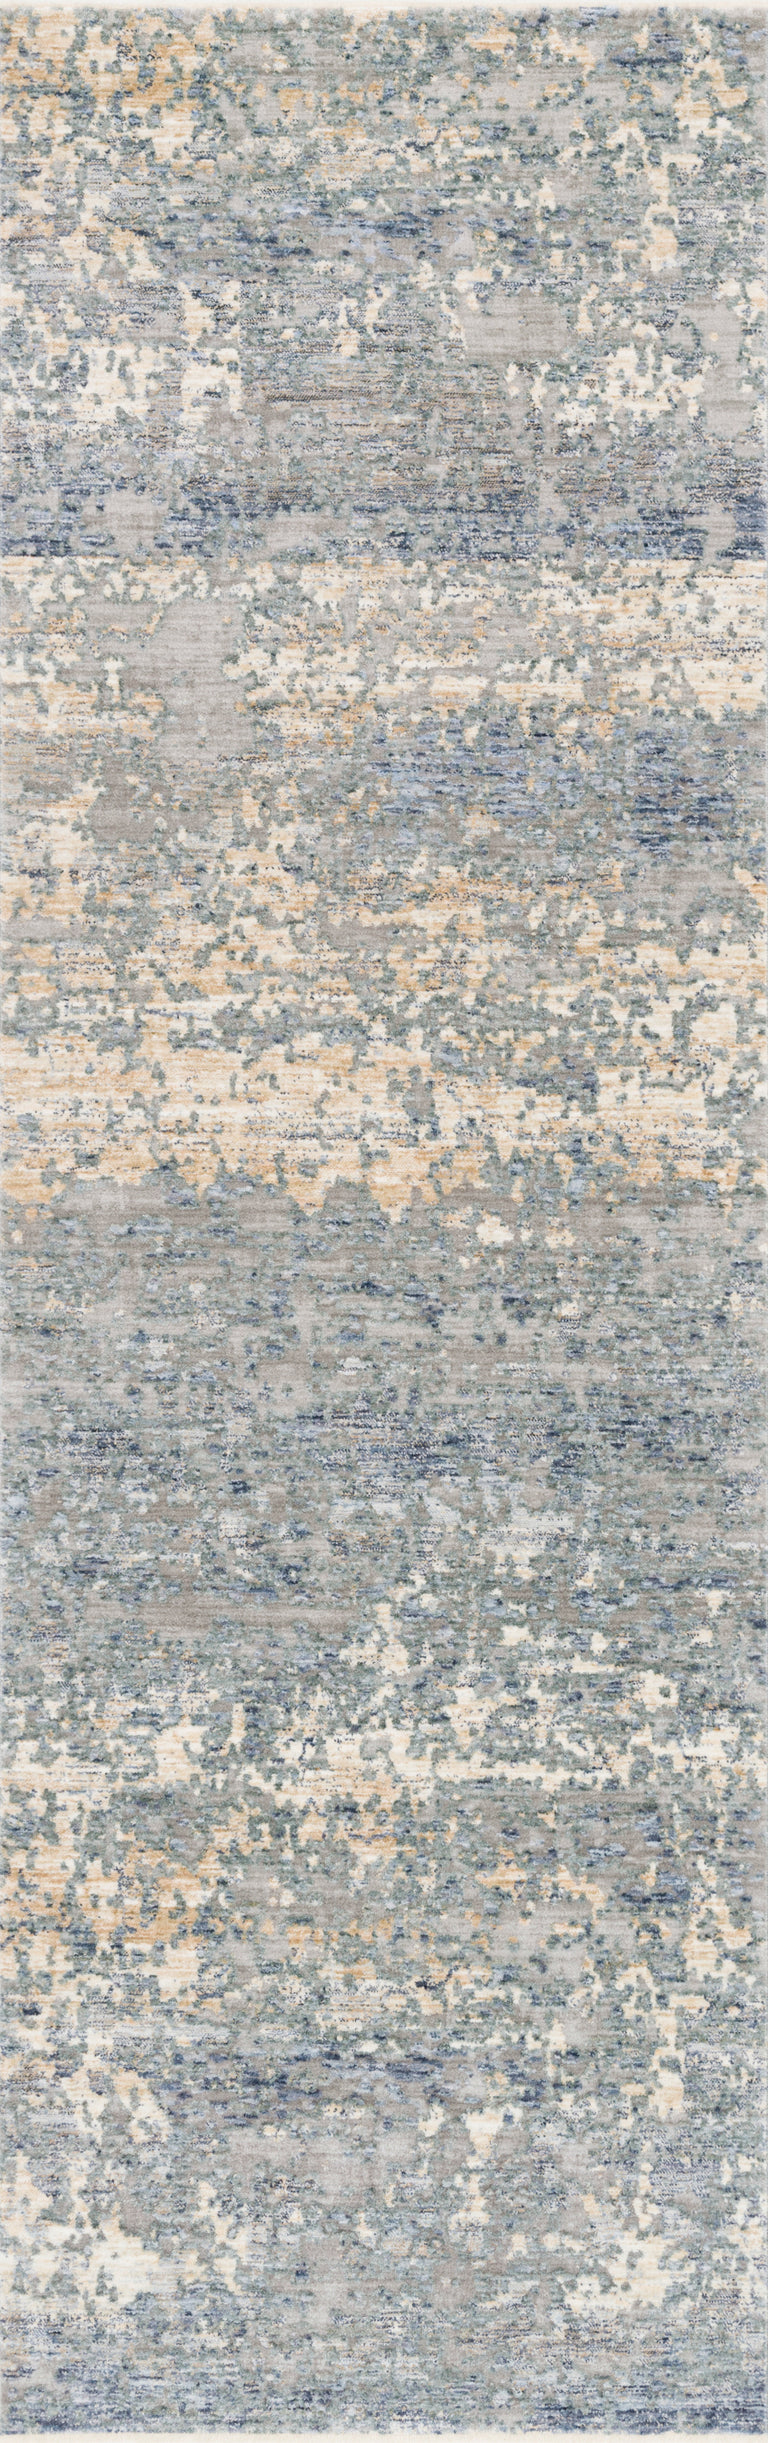 Loloi Rugs Pandora Collection Rug in Blue, Gold - 6'3" x 8'10", PANDPAN-05BBGO638A